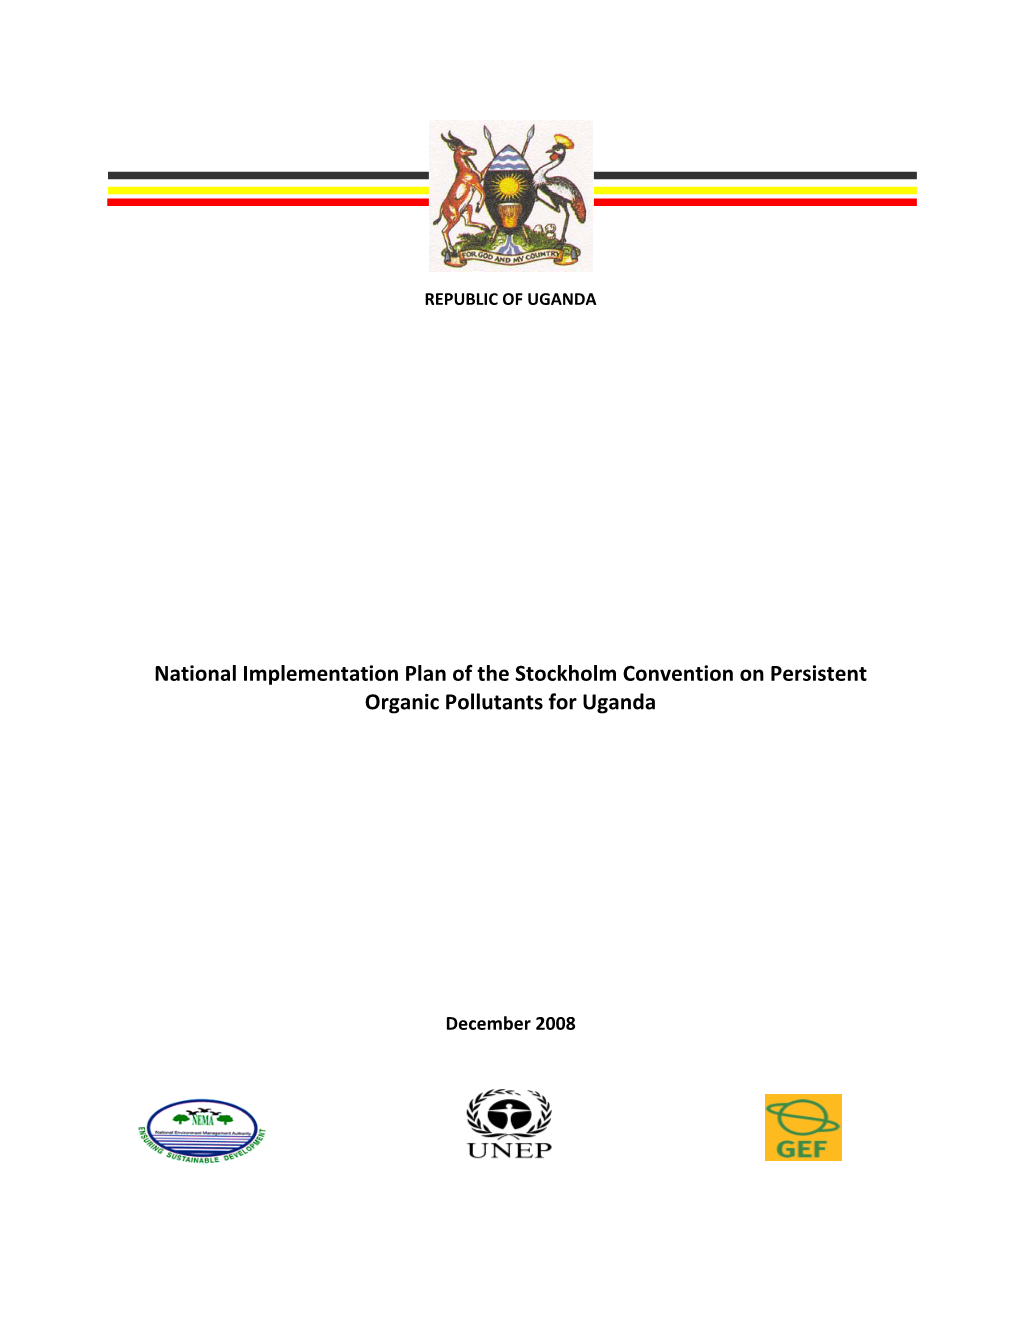 National Implementation Plan of the Stockholm Convention on Persistent Organic Pollutants for Uganda